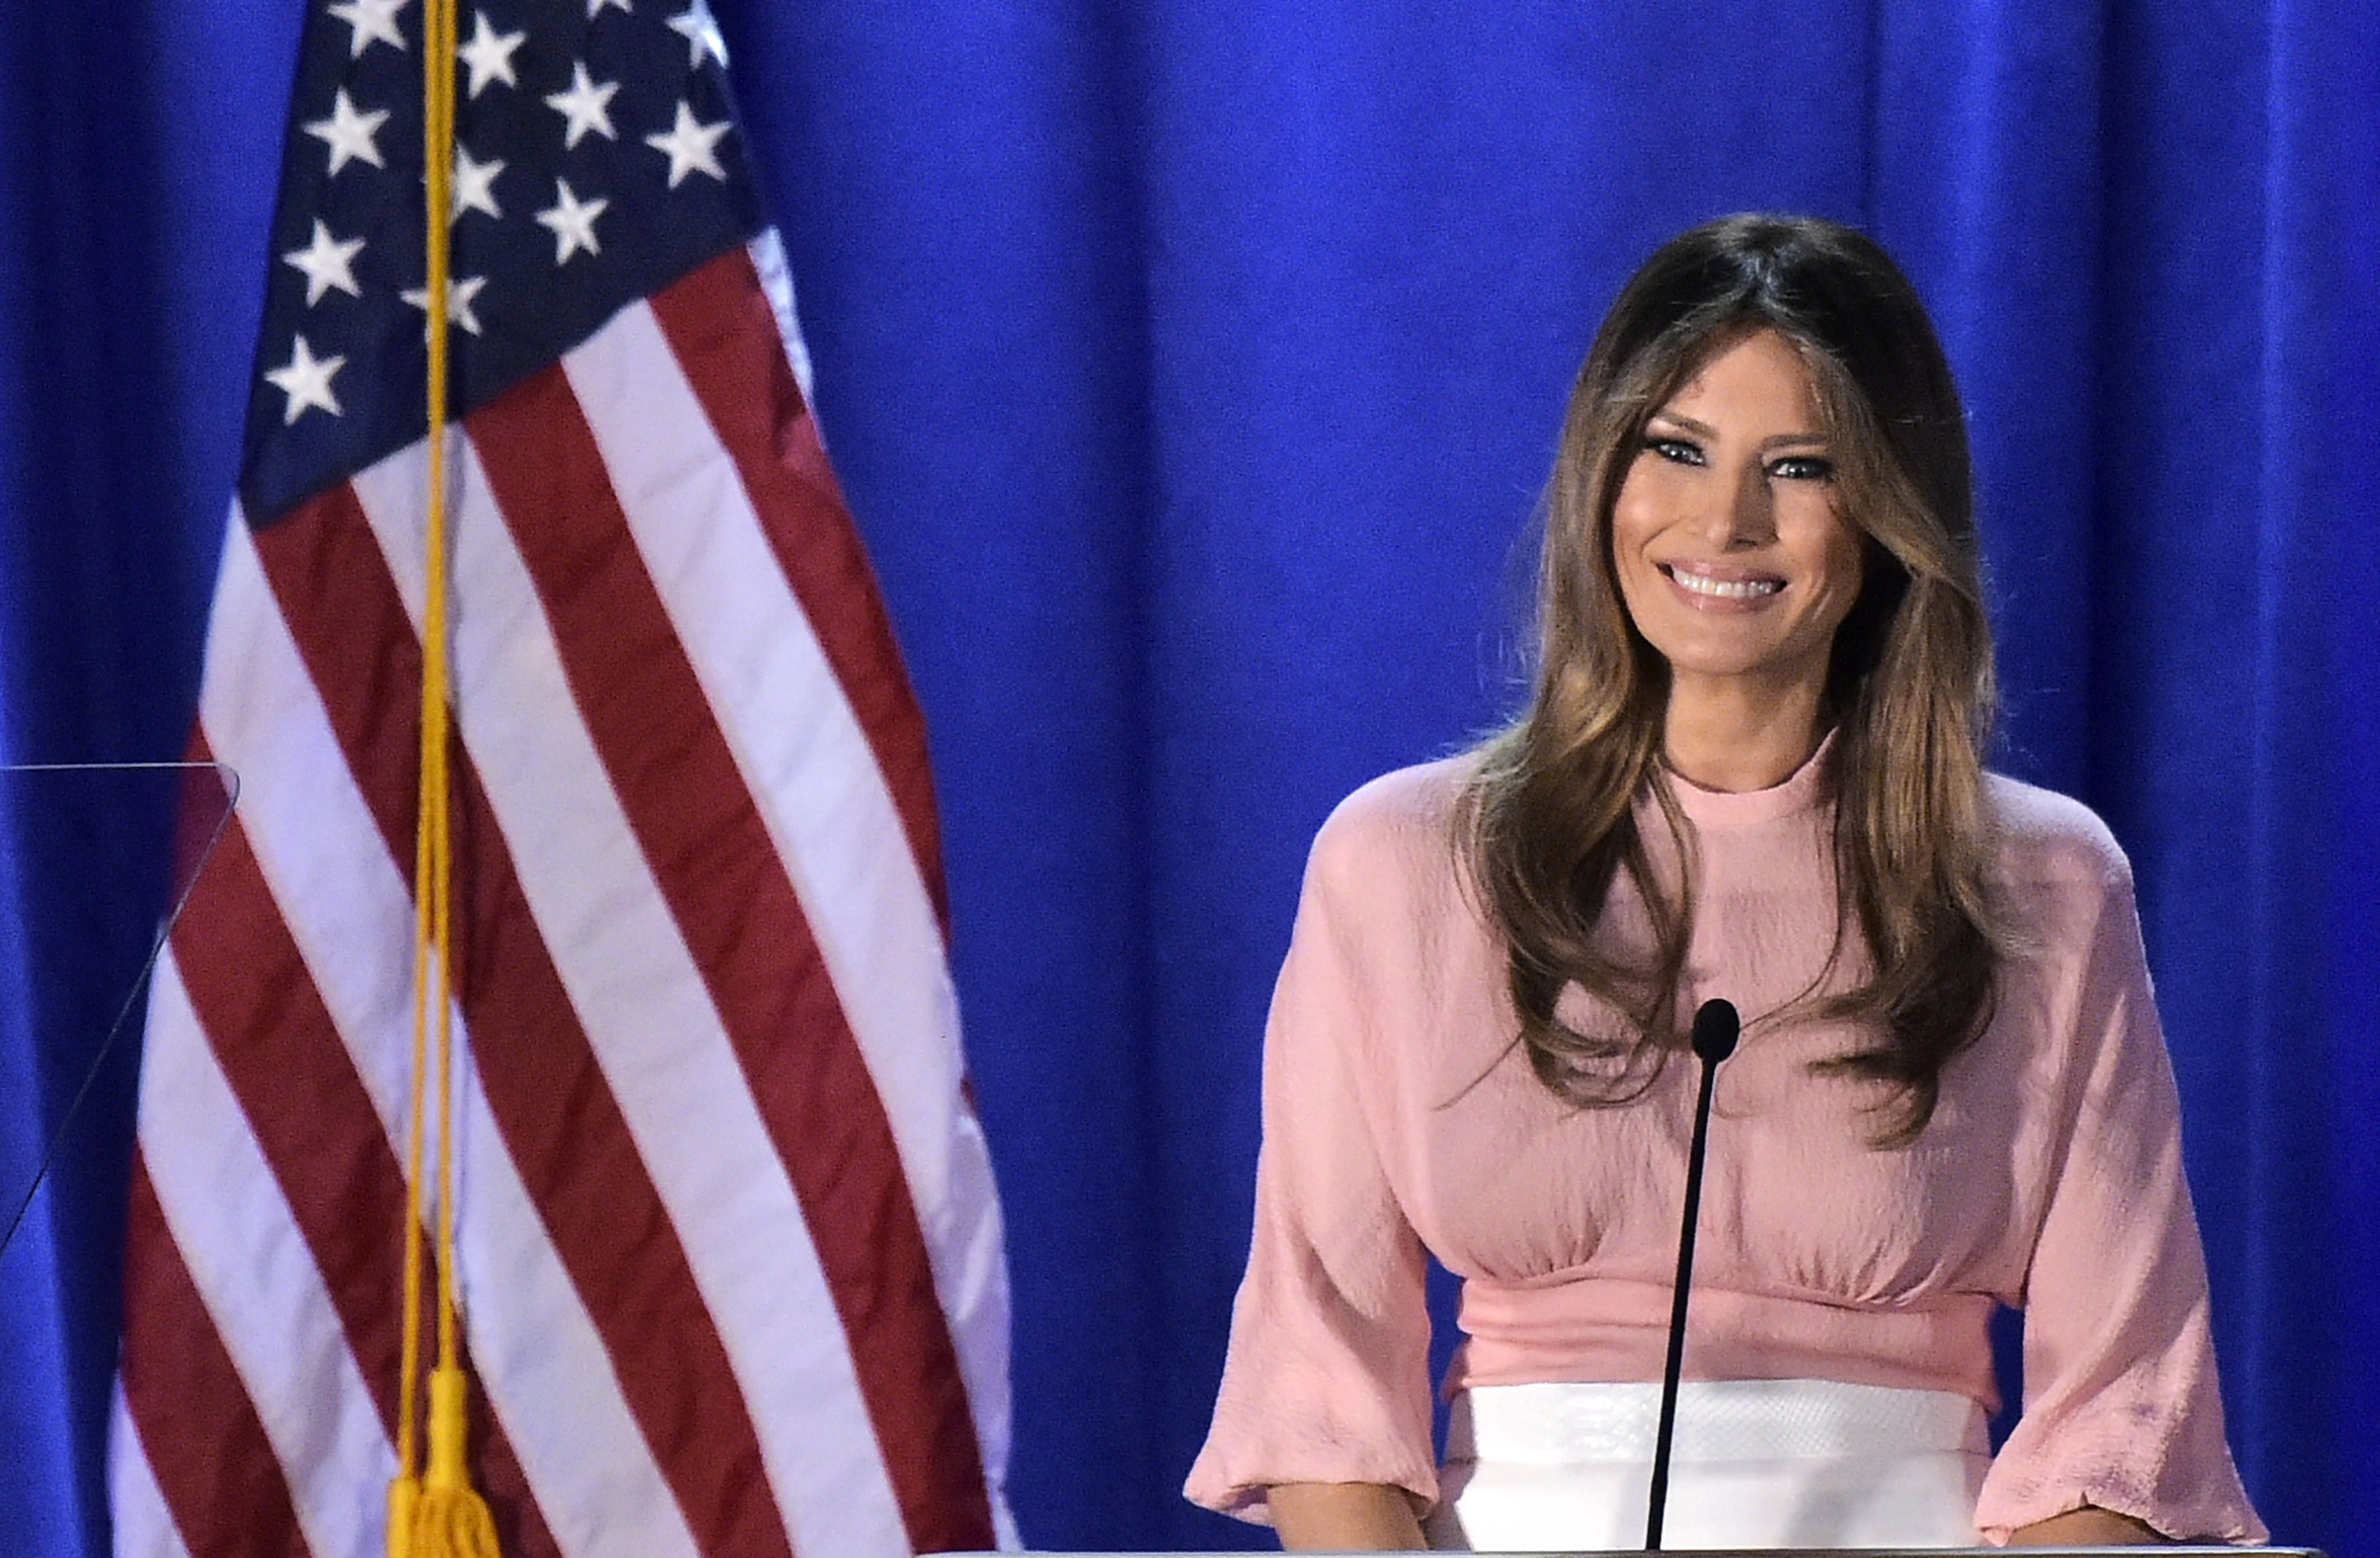 Melania Trump, the wife of Republican presidential nominee Donald Trump, speaks during a rally for her husband on November 3, 2016 at the Main Line Sports Center in Berwyn, Pennsylvania. / AFP PHOTO / MANDEL NGAN